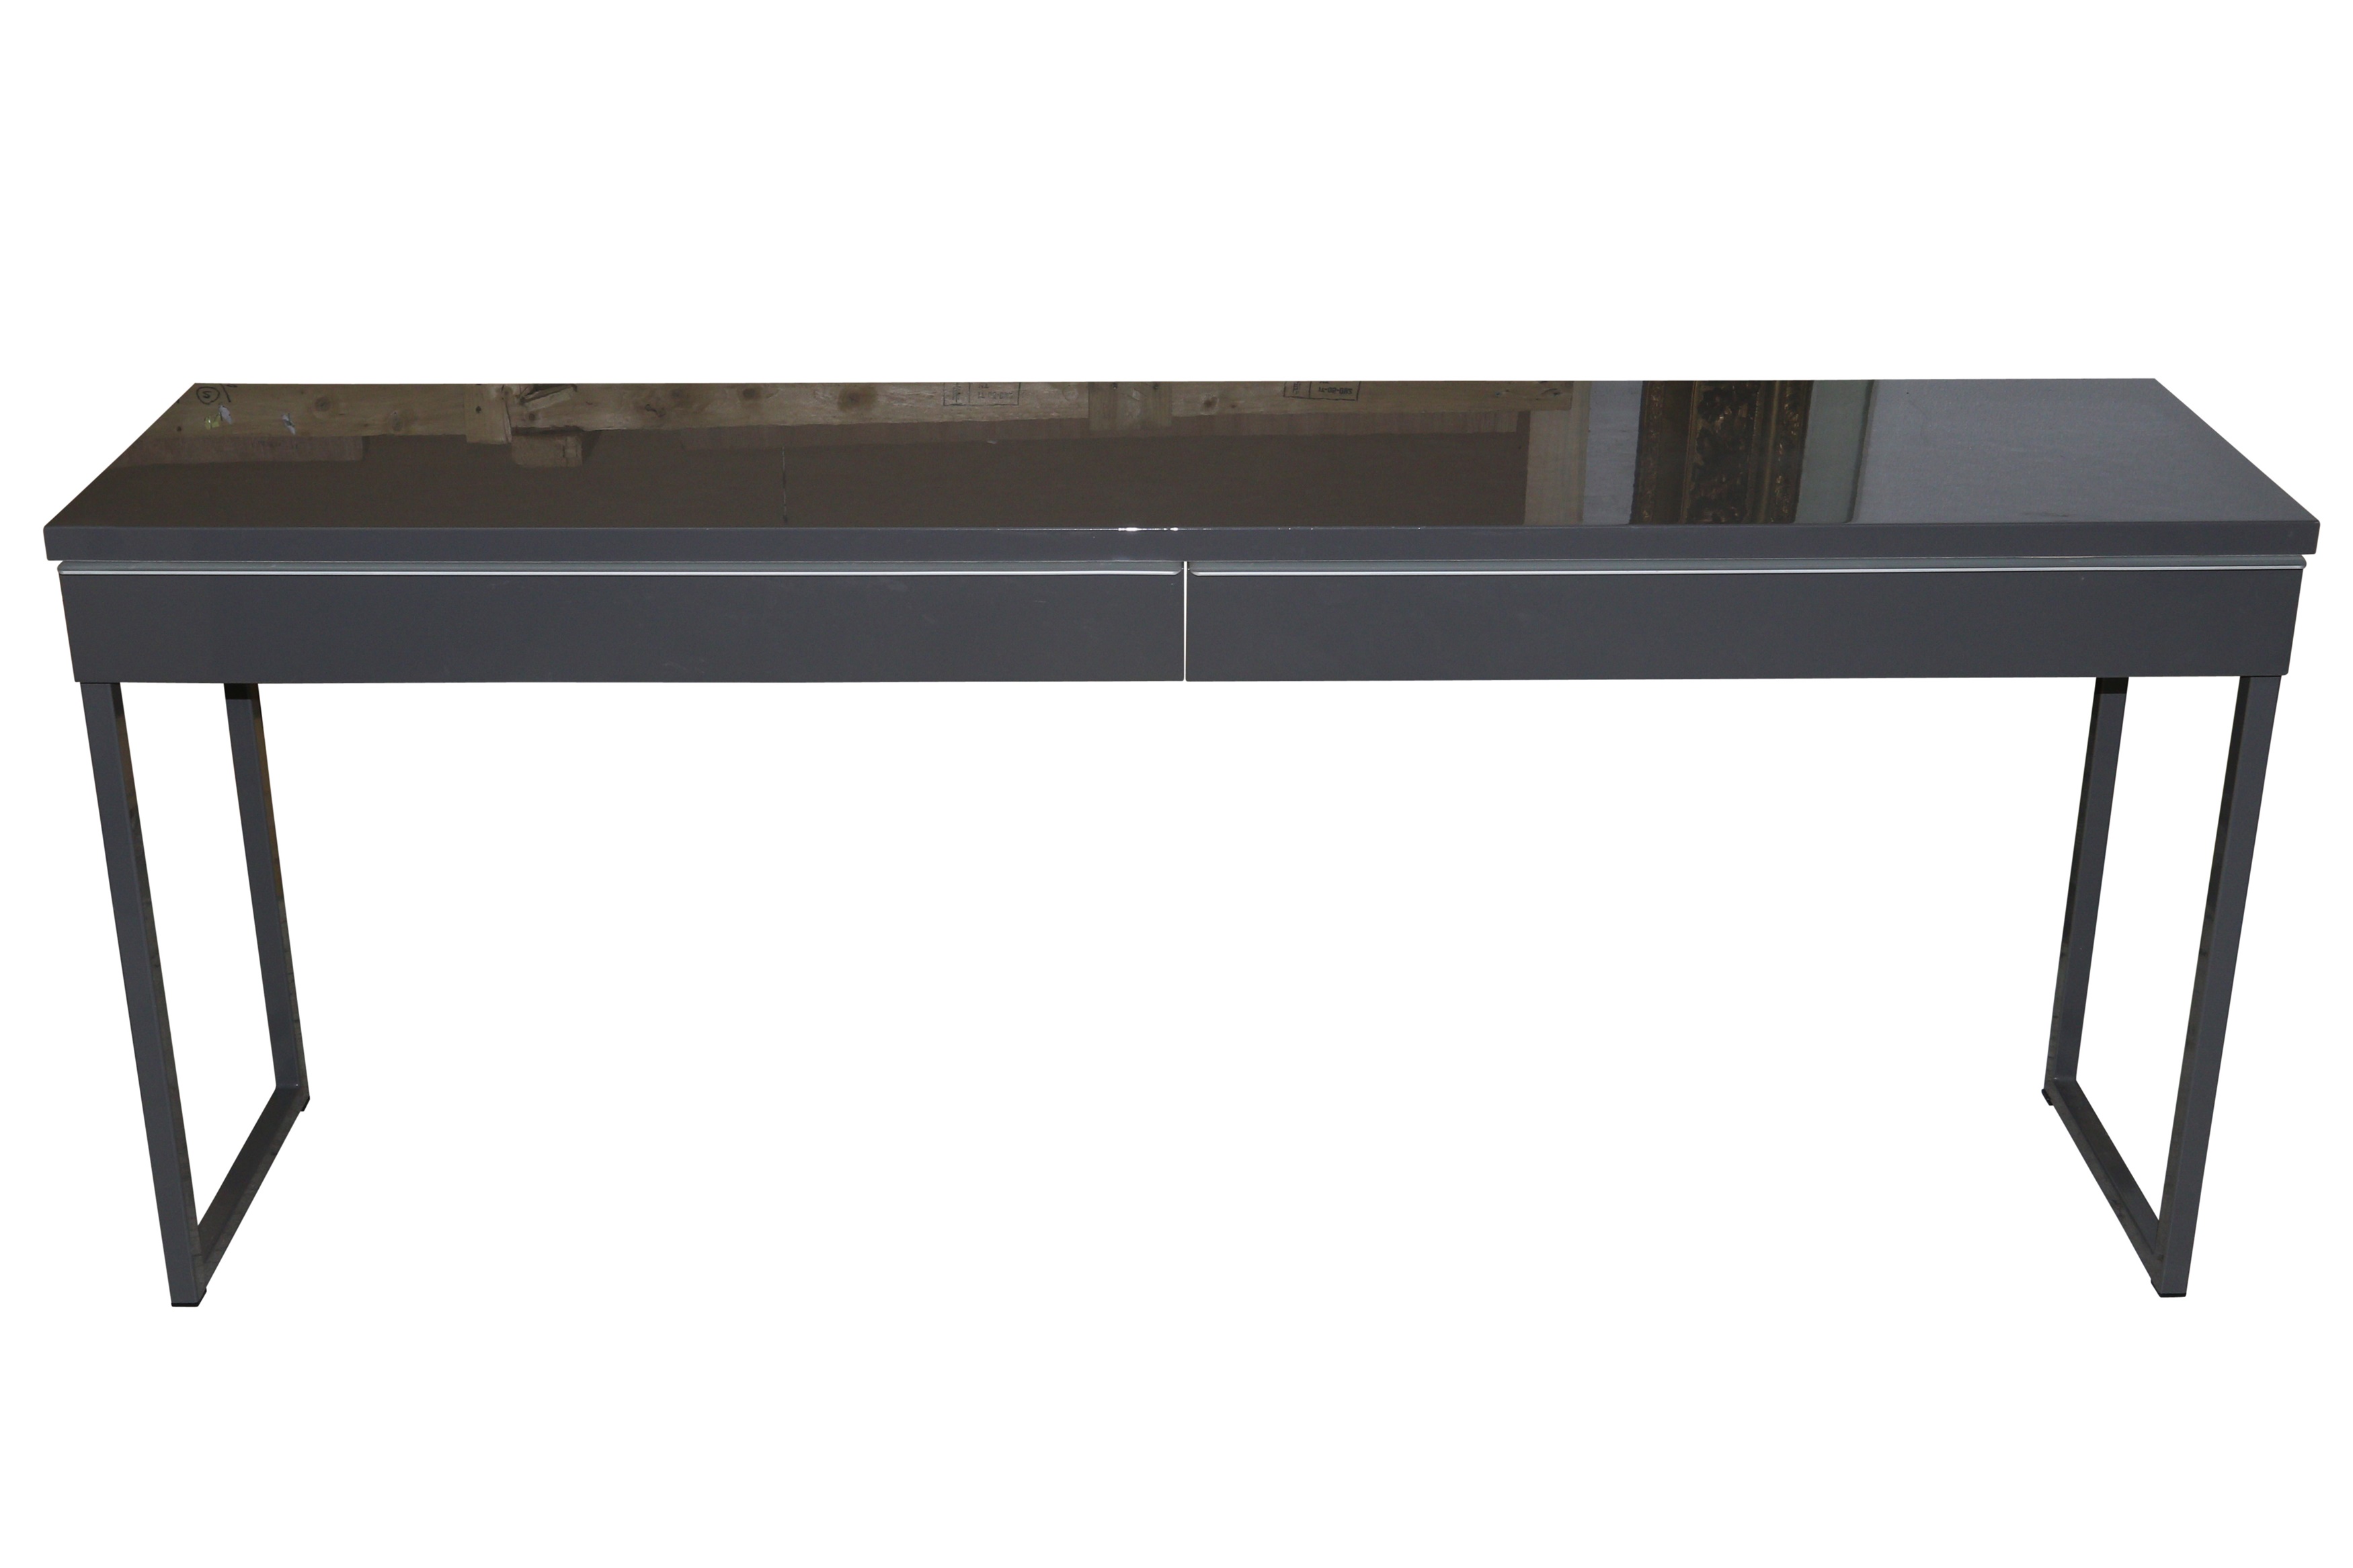 A CONTEMPORARY CONSOLE TABLE IN A GLOSSY GREY FINISH